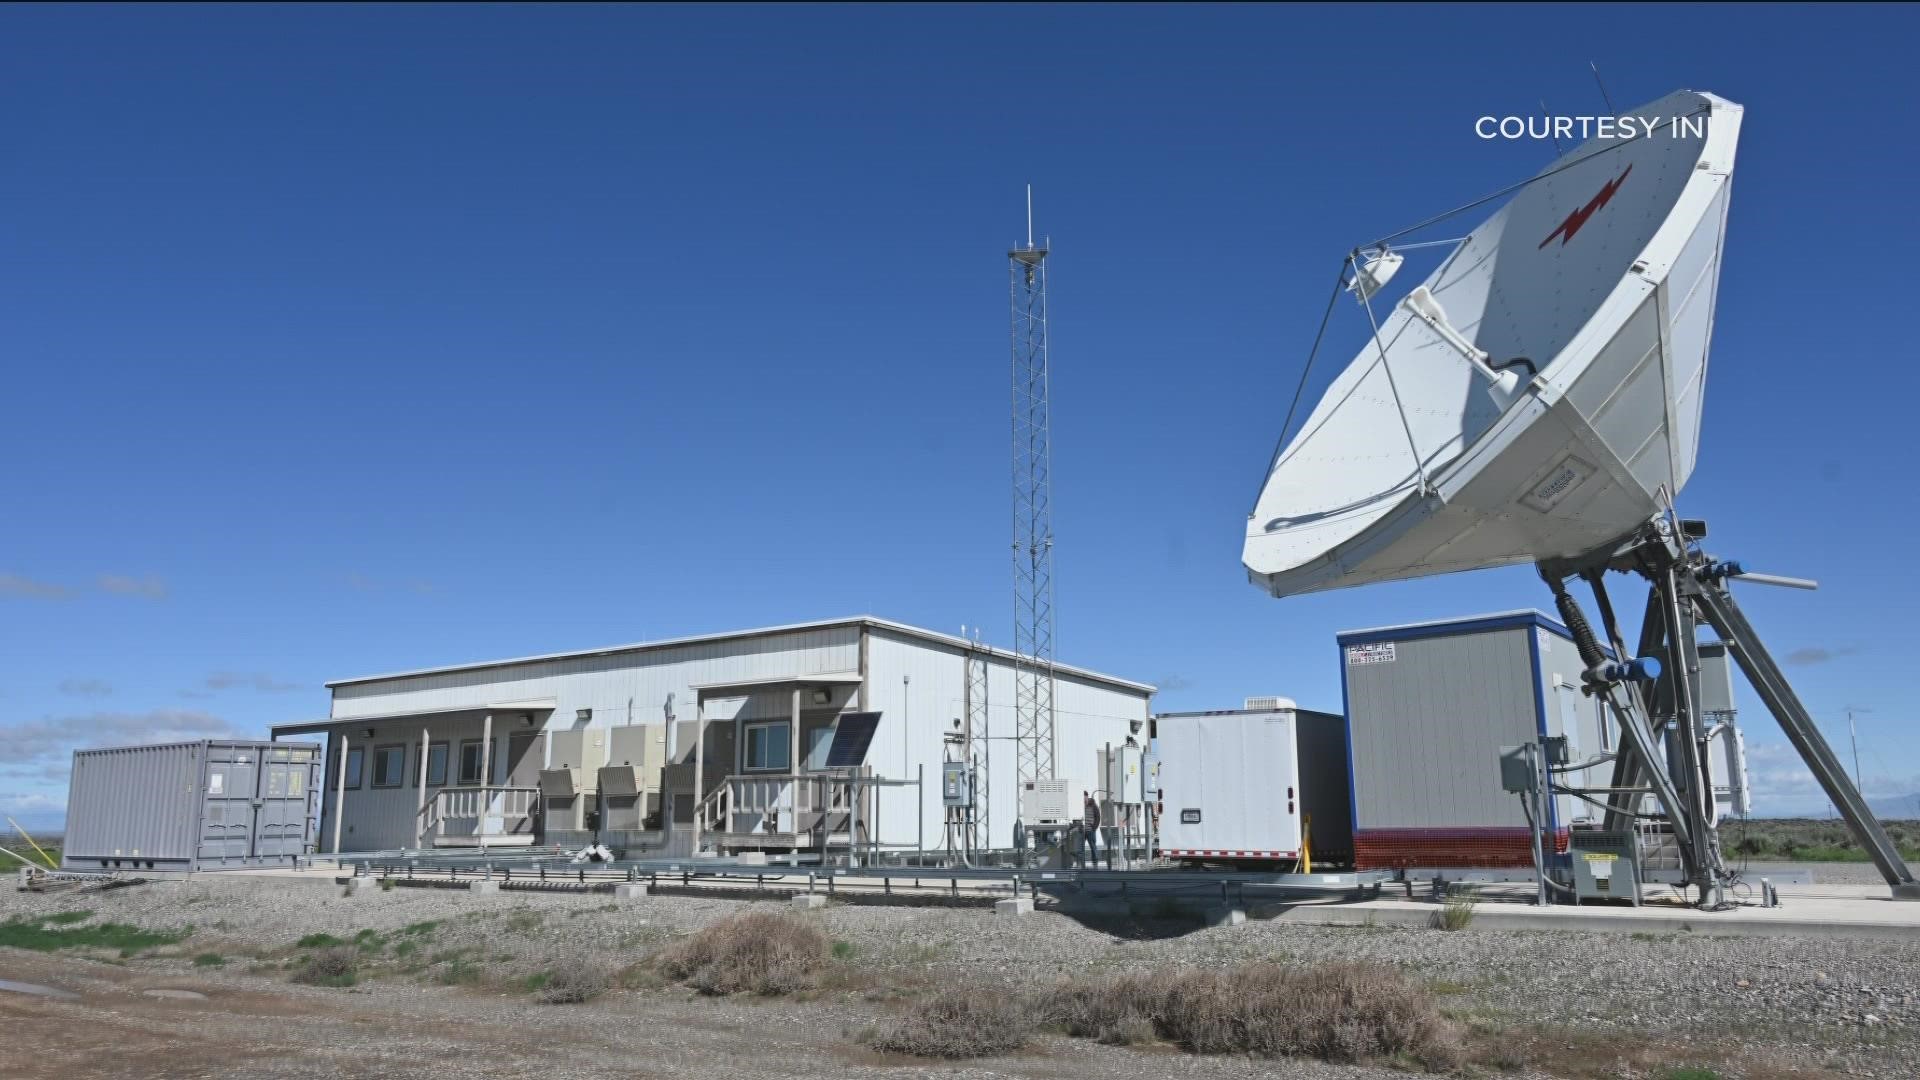 The nation's first open-air, 5G wireless test range is now open across the Idaho National Laboratory's (INL) site in eastern Idaho.